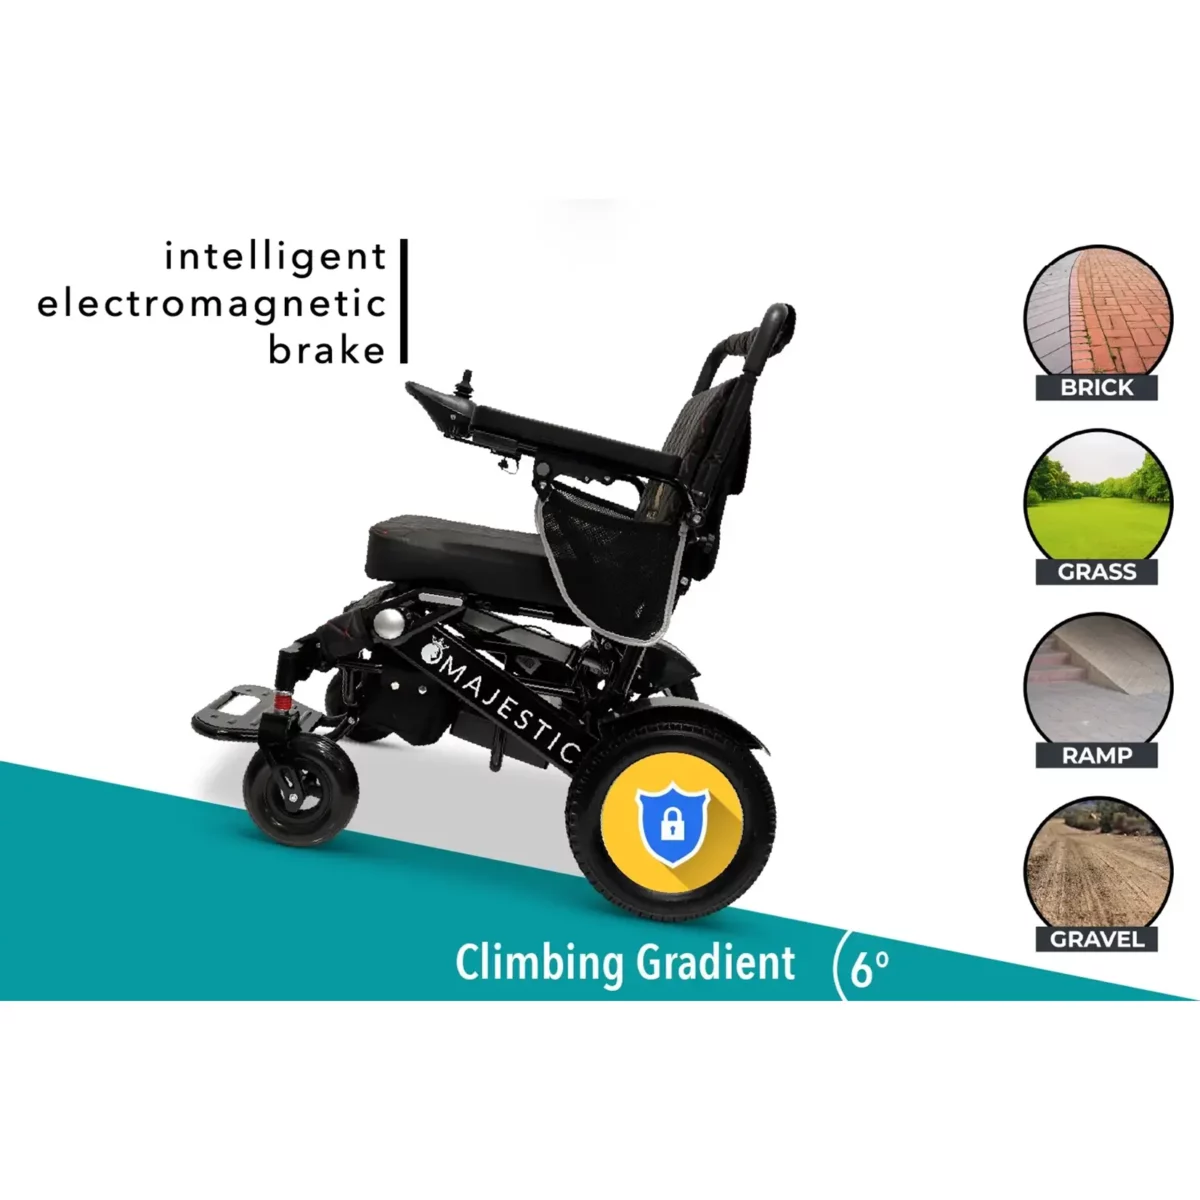 Majestic IQ-7000 Remote Controlled Folding Electric Wheelchair